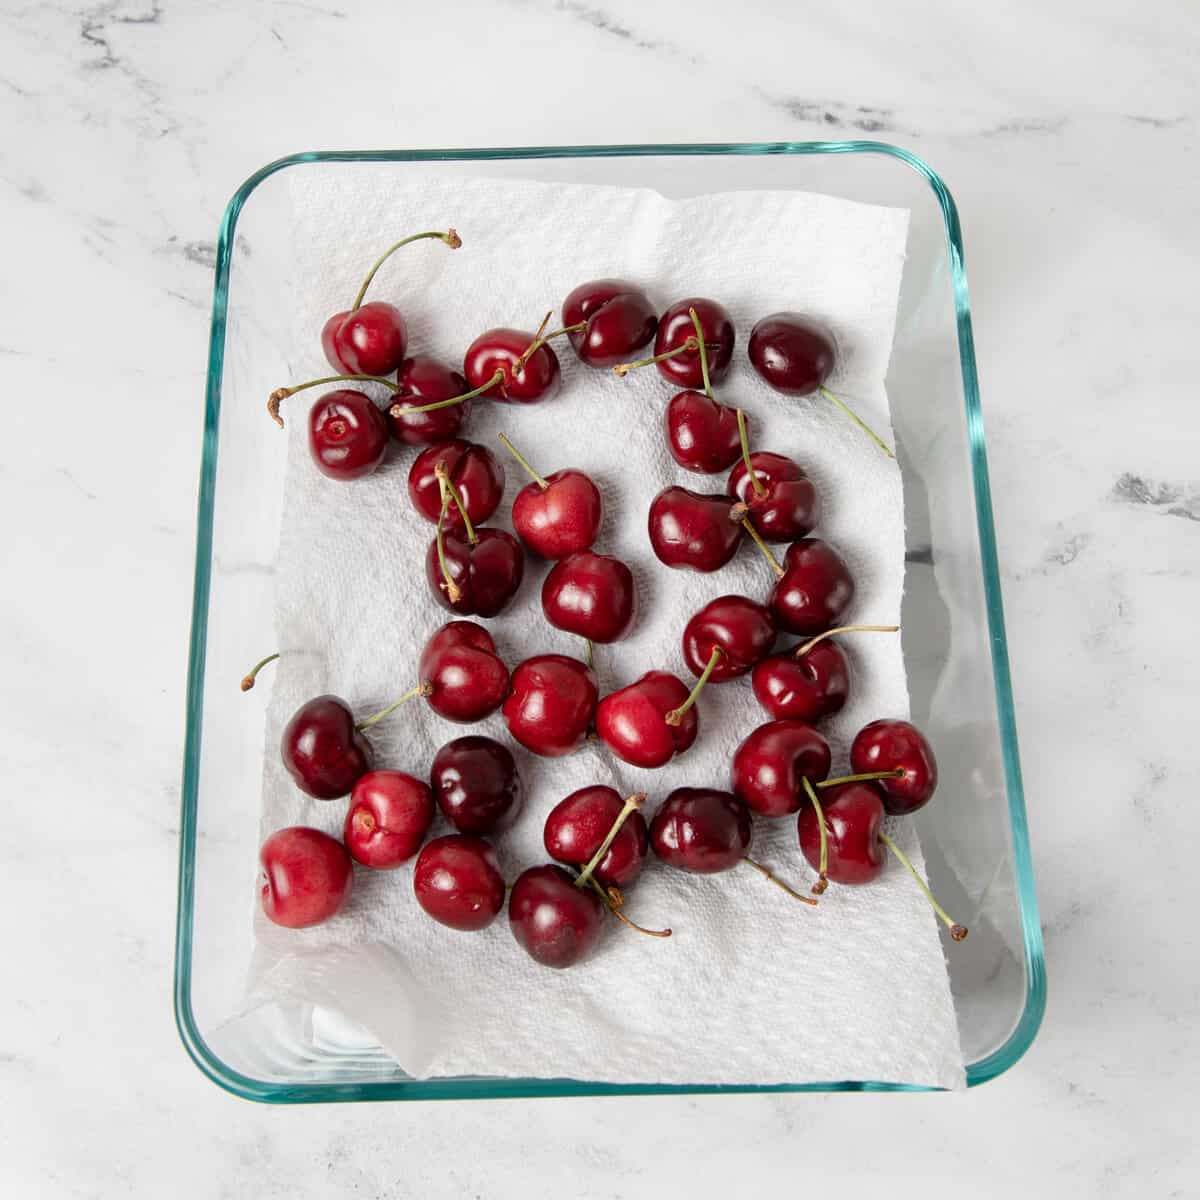 Cherries in a storage container with a towel.